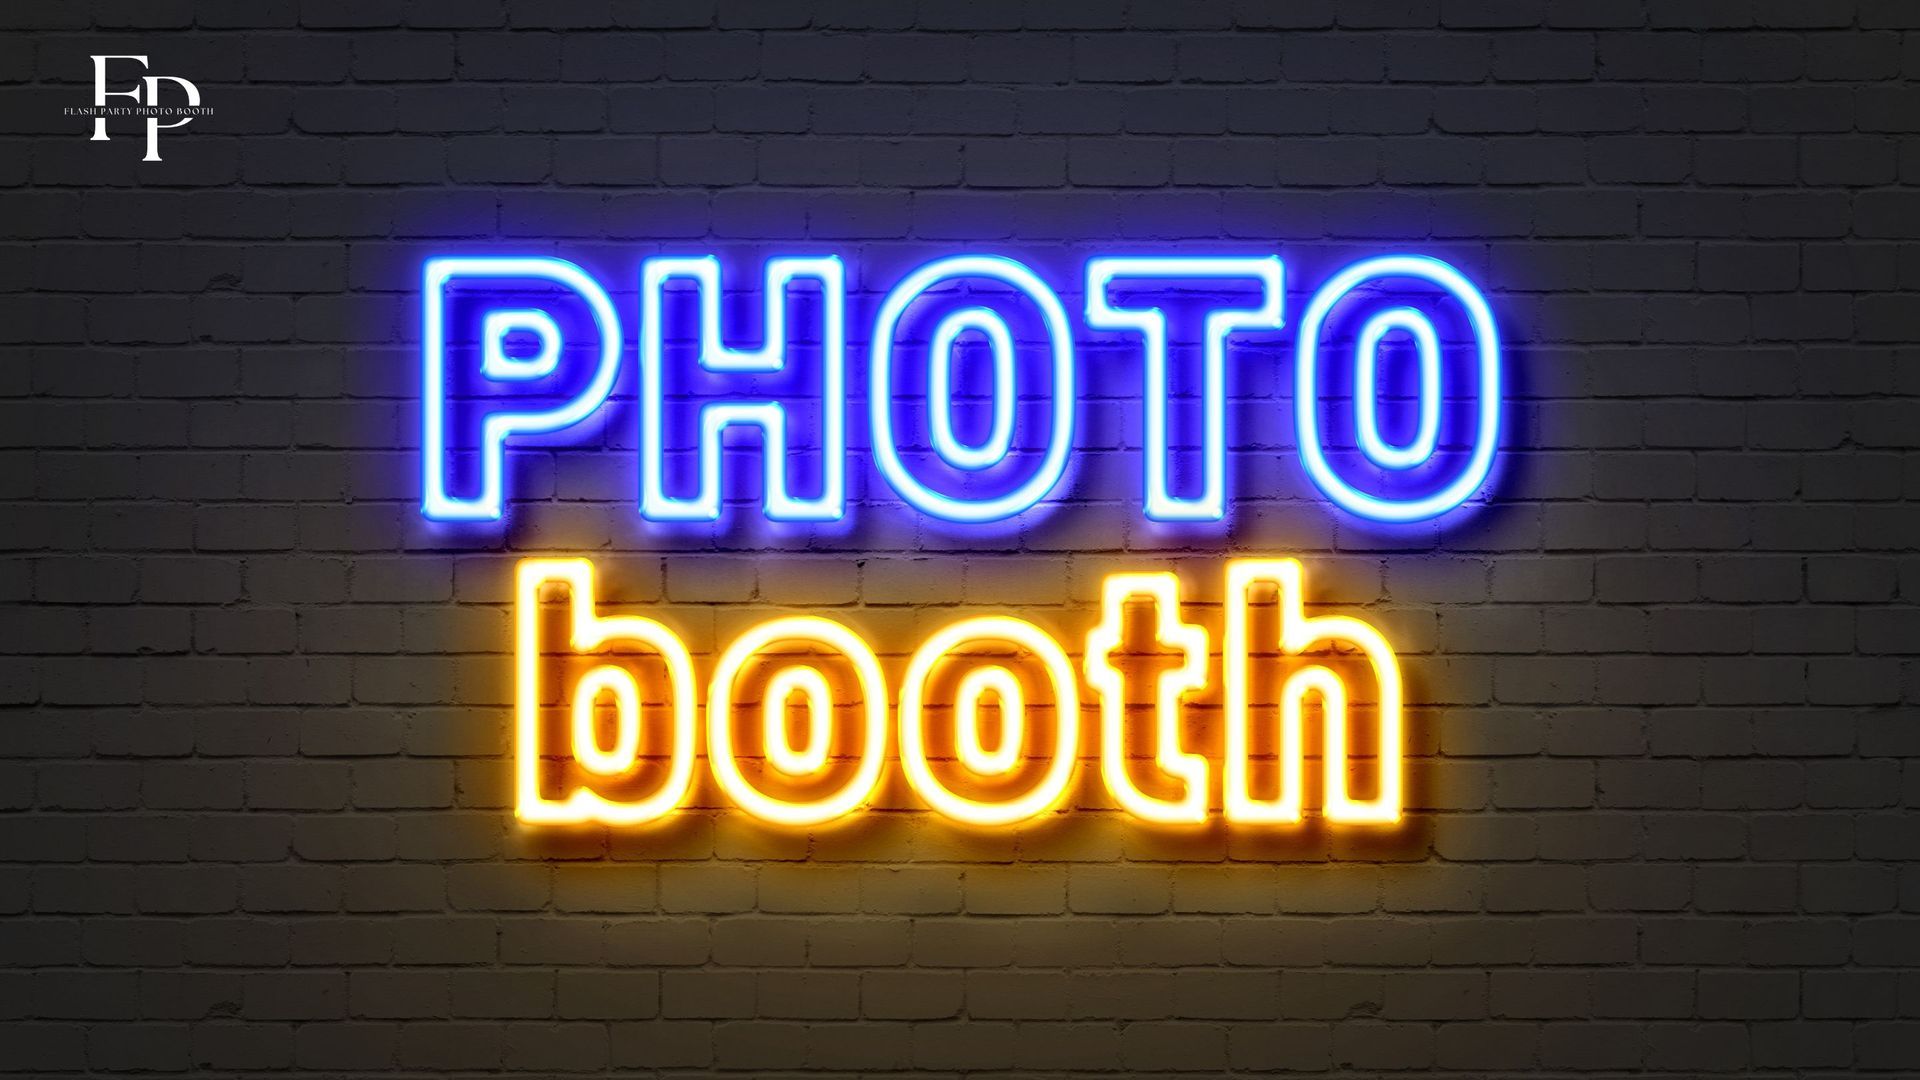 Photo booth sign